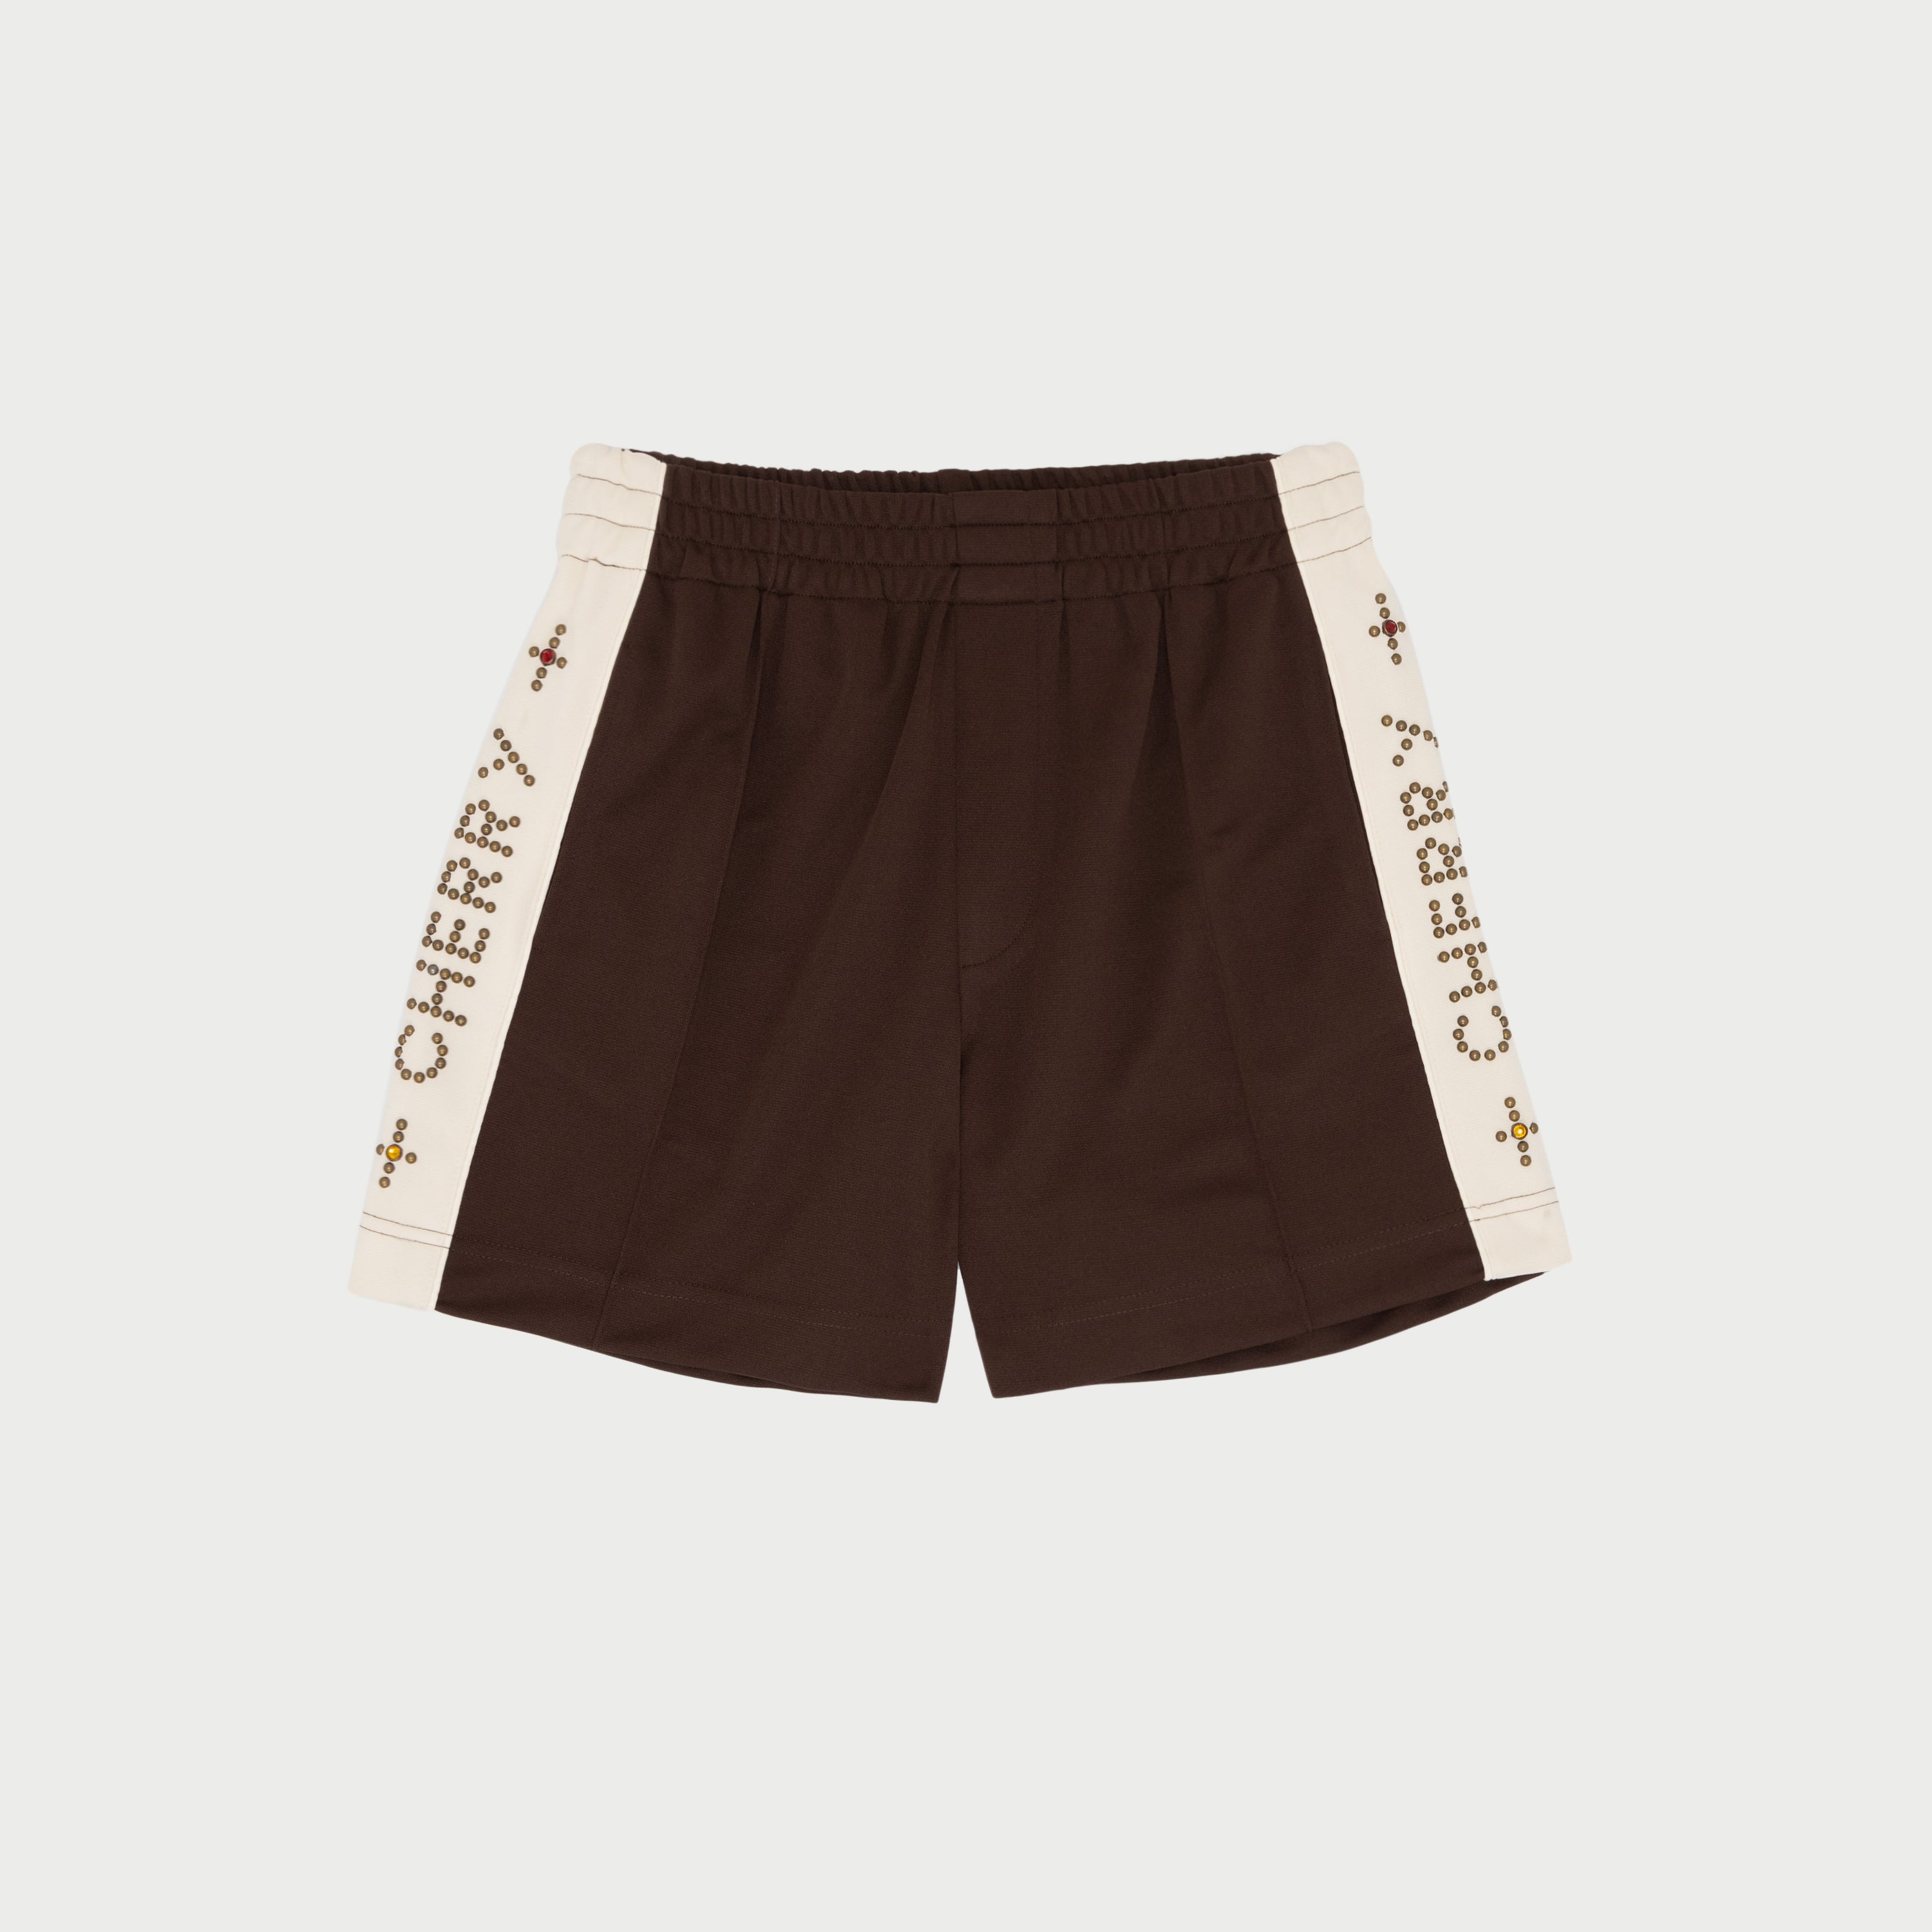 Studded Shorts (Brown)